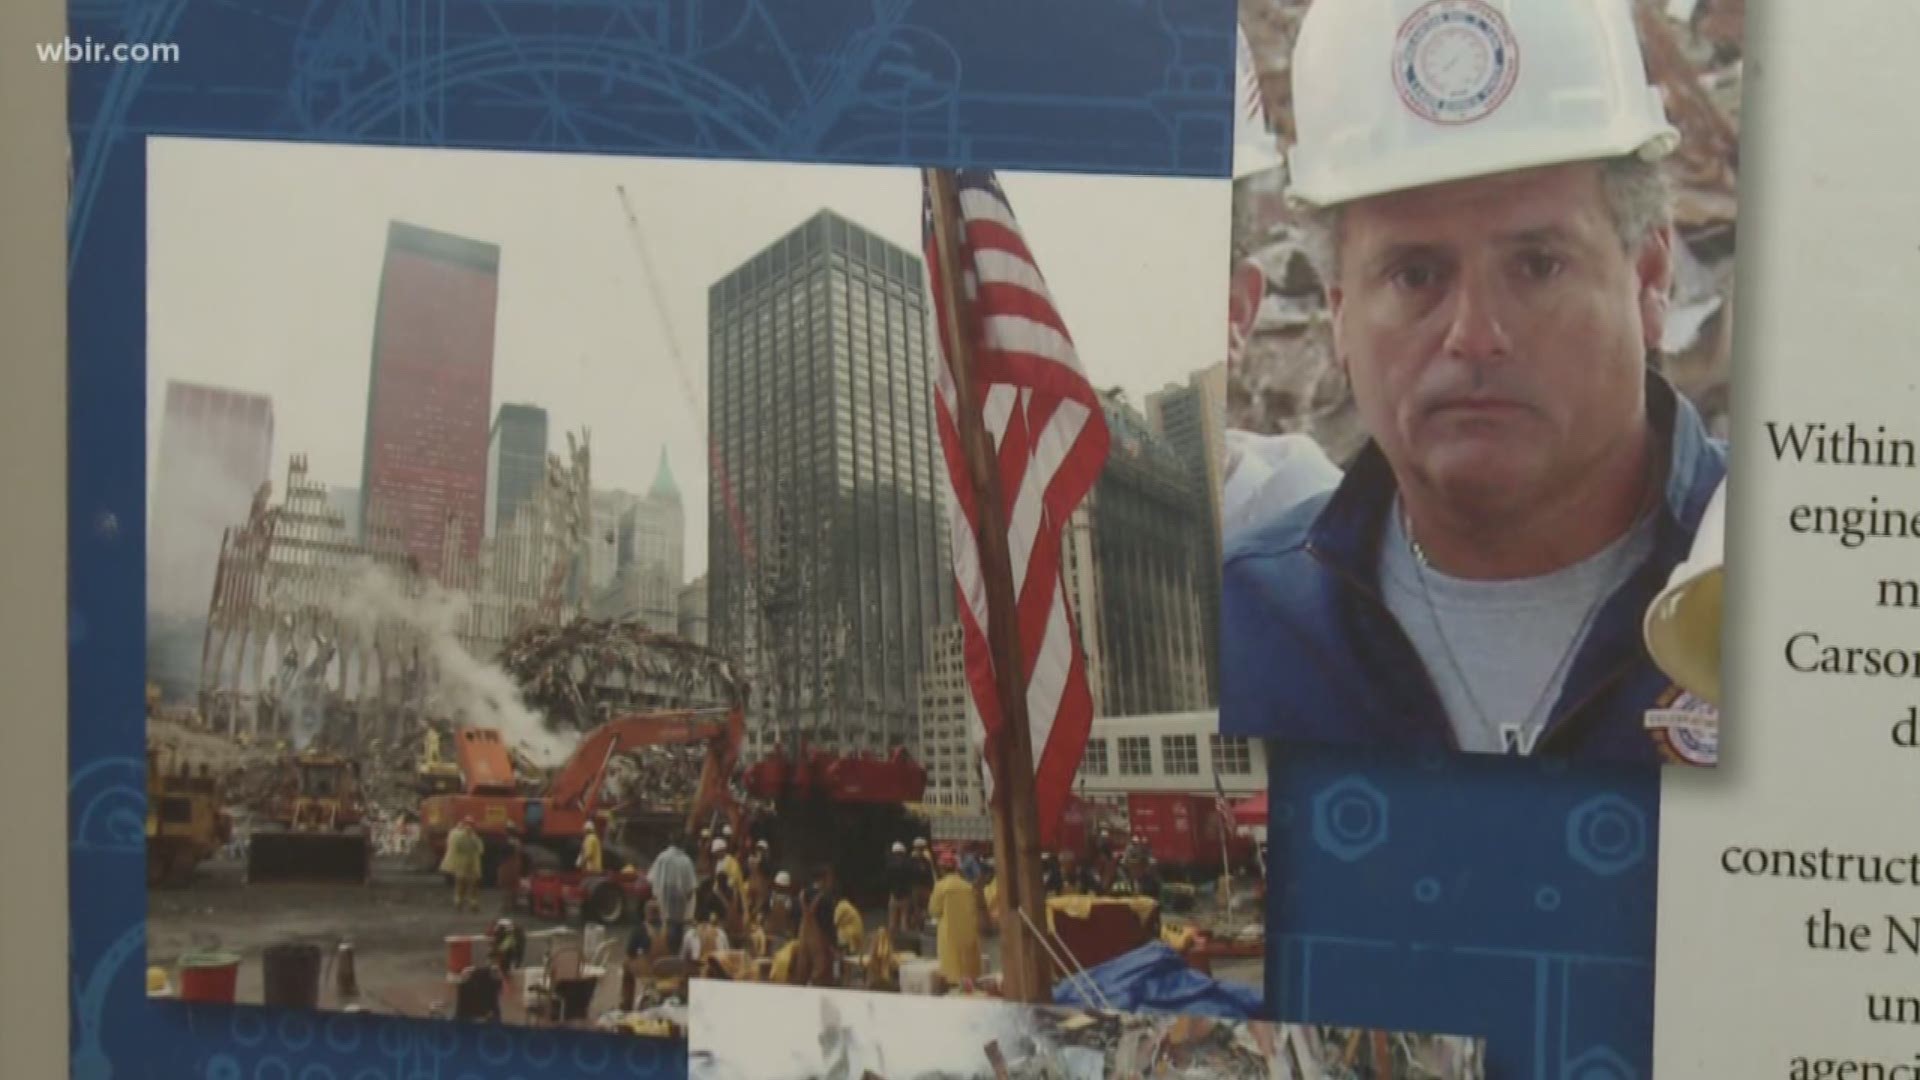 Sep. 11, 2018: On a day of remembrance for the 9/11 attacks, we also remember an East Tennessee man who led the cleanup of the fallen towers of the World Trade Center and died in 2016.